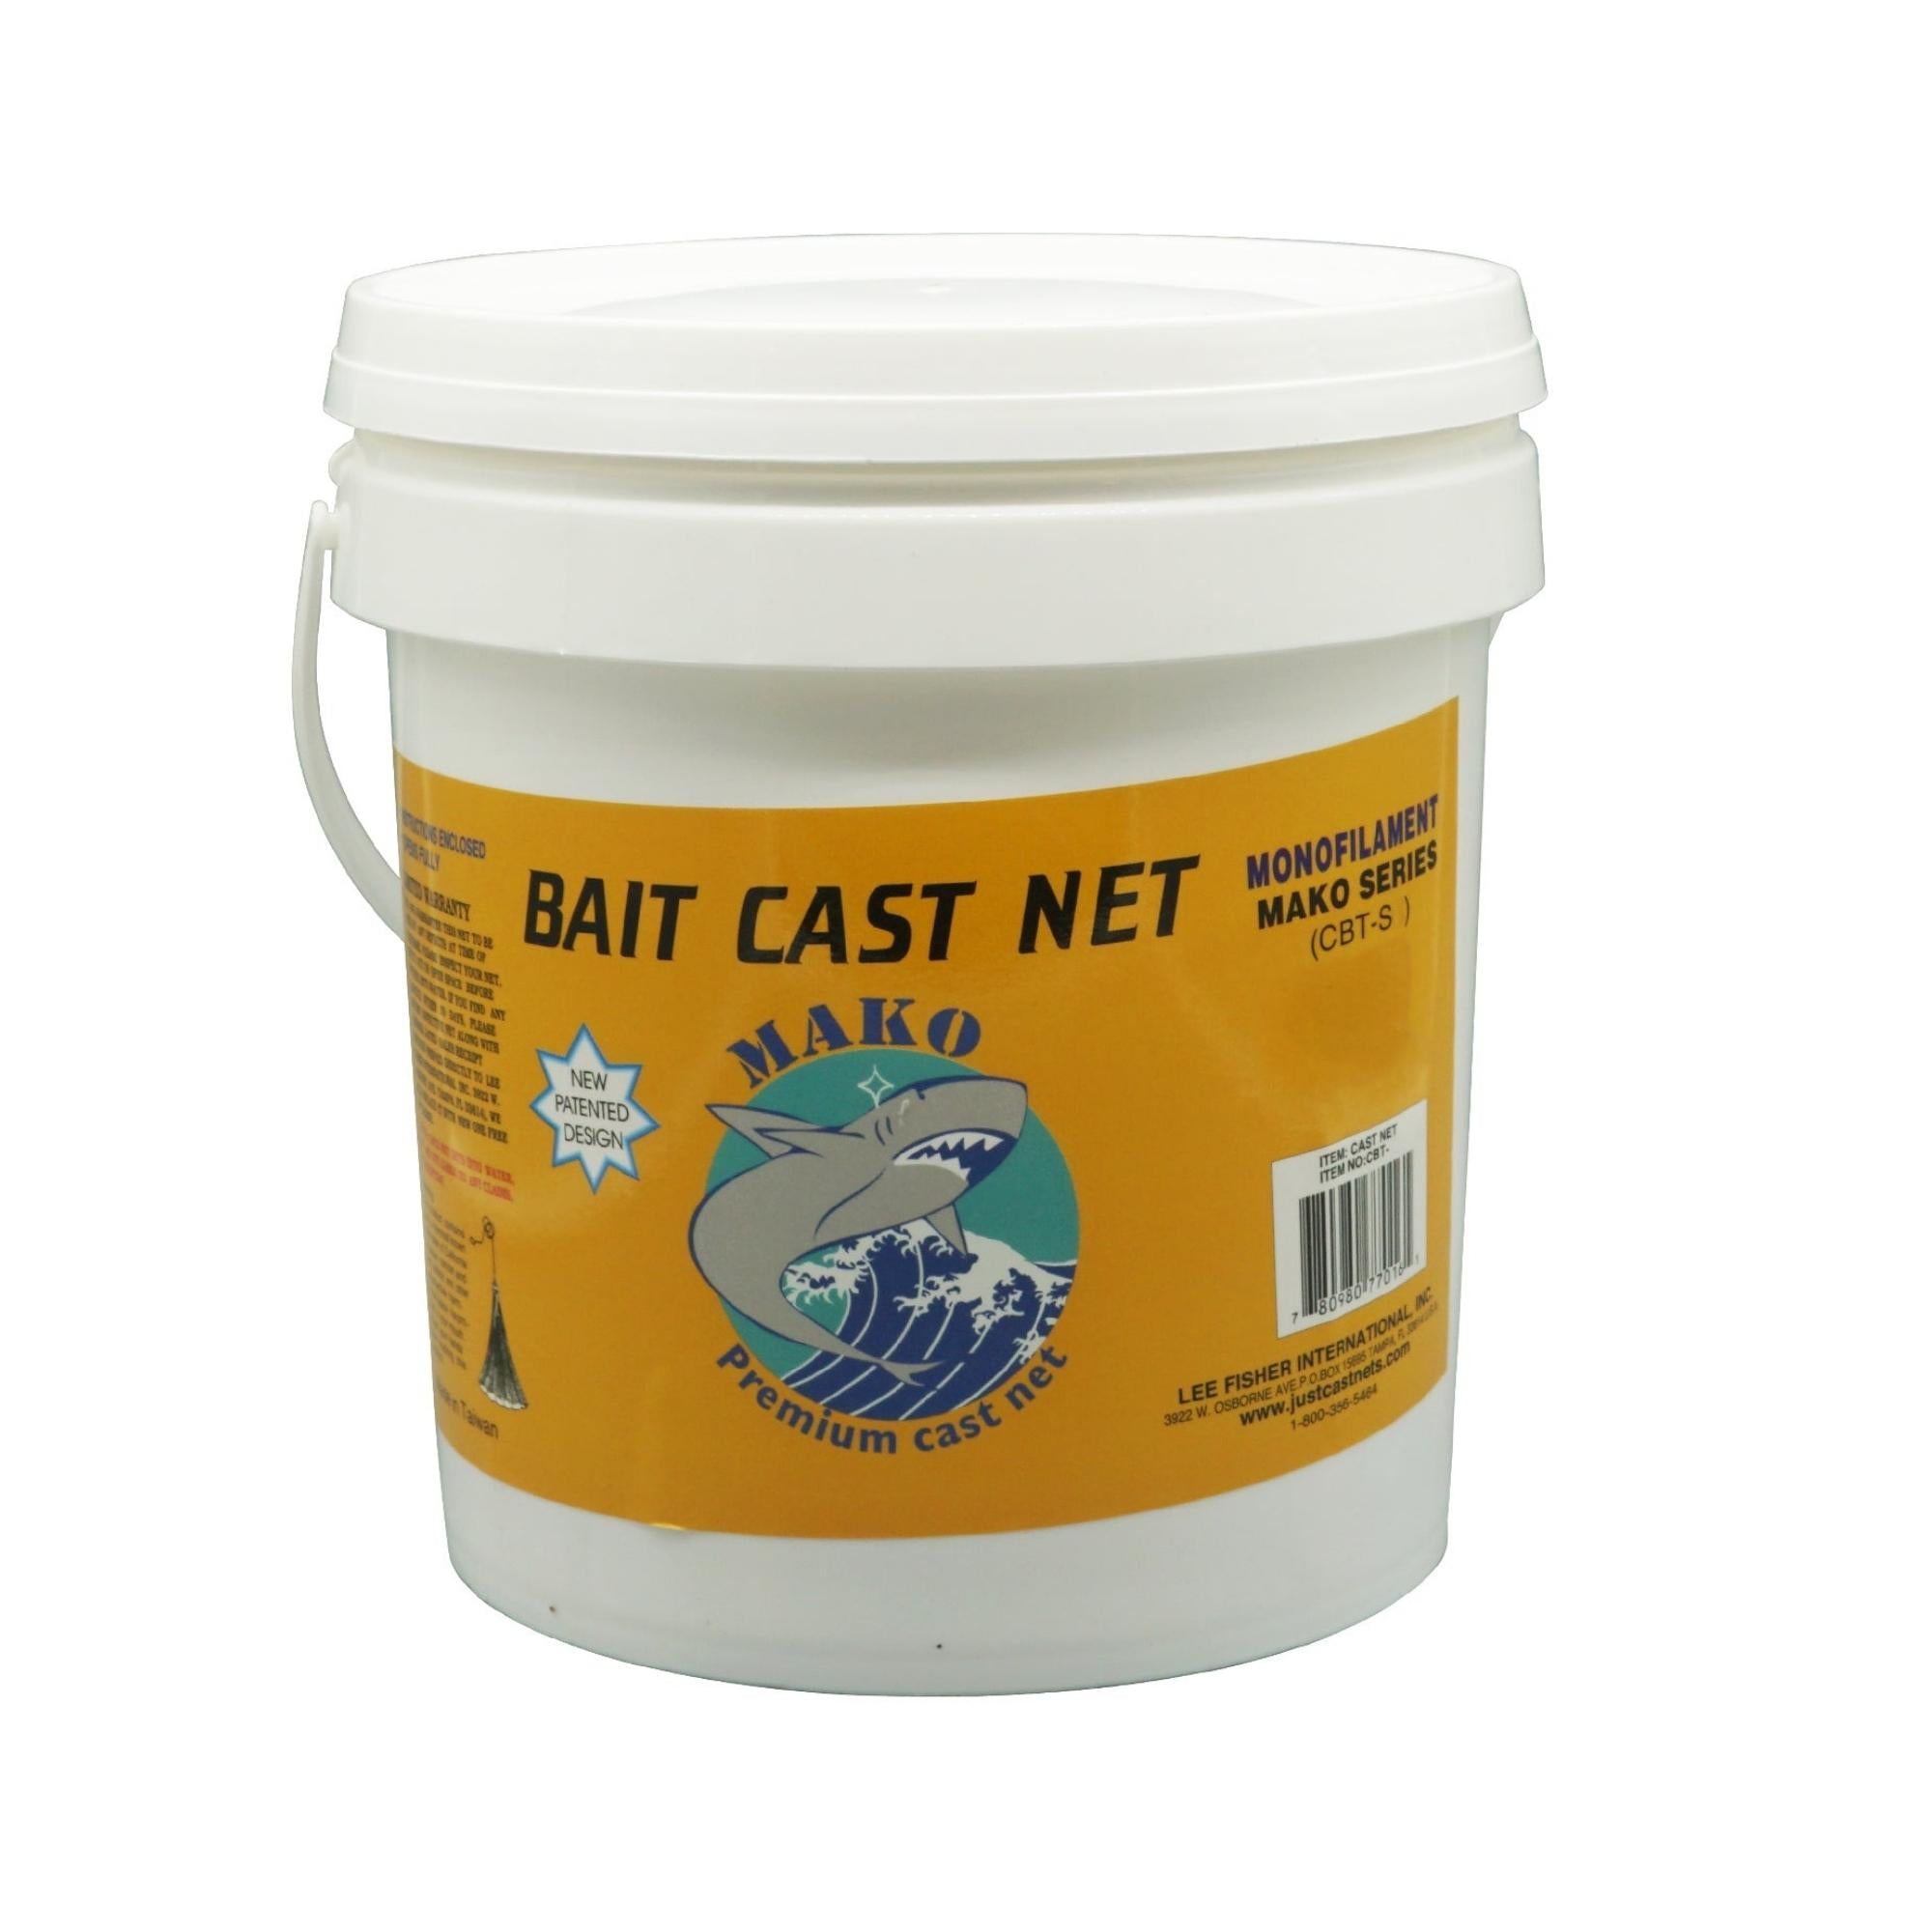 Lee Fisher Cast Nets – Lee Fisher Sports